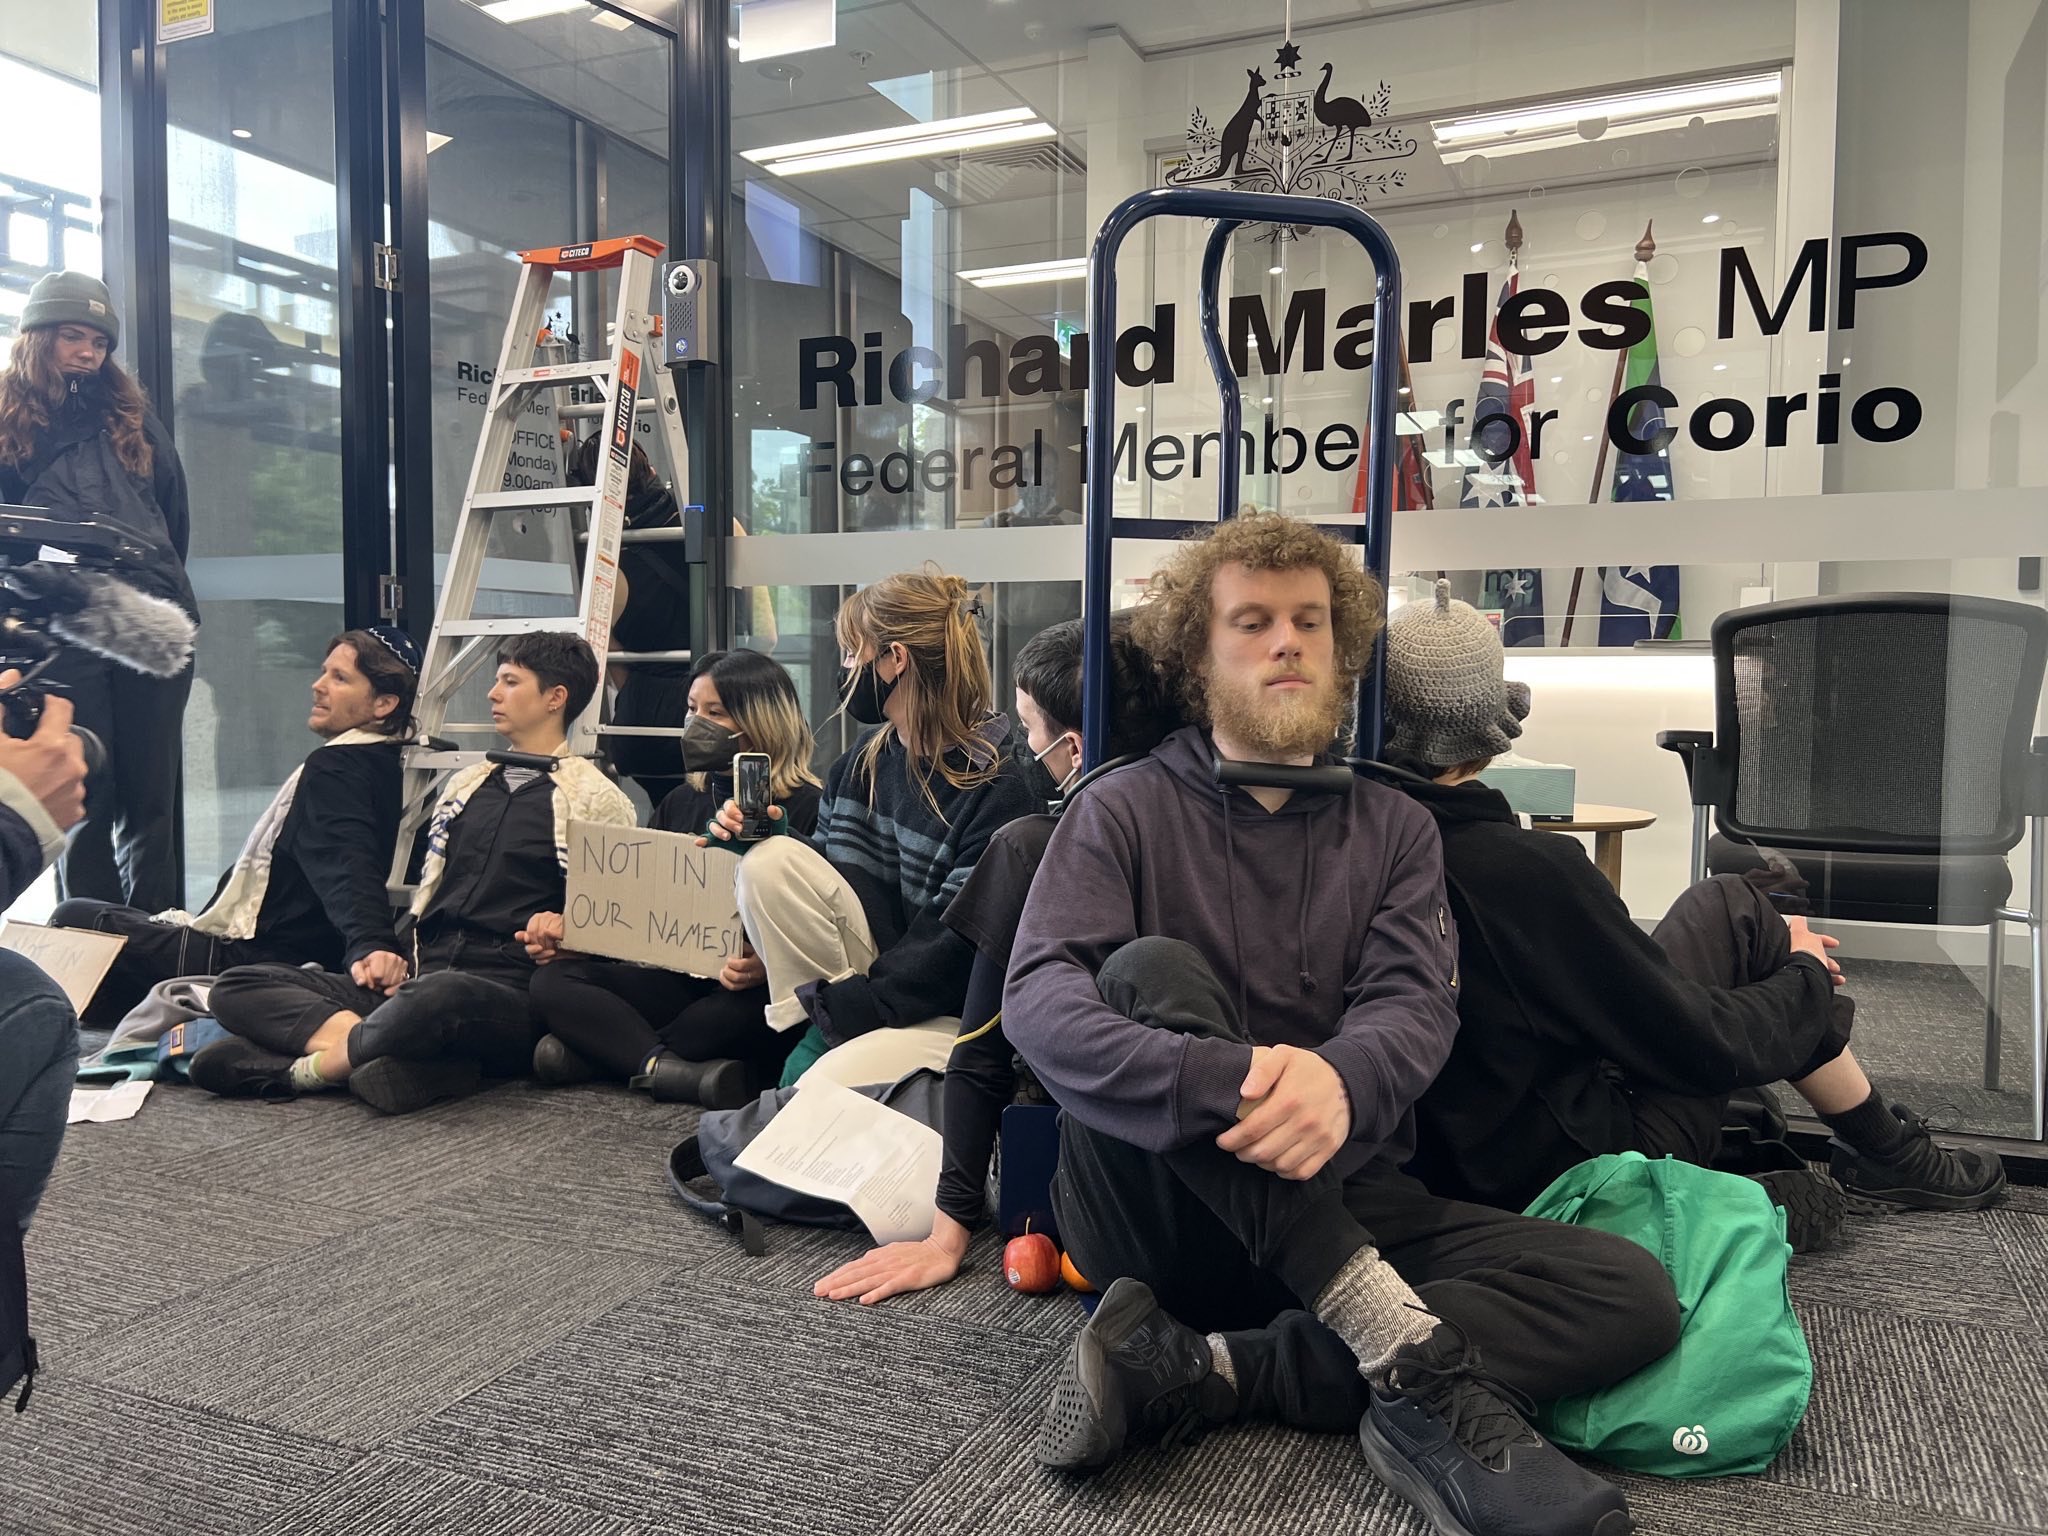 A group of protesters sit on the floor outside Richard Marles' office. Some of them are locked on by the neck to a trolley, while others are locked on by the neck to a ladder standing in the open doorway of the office.